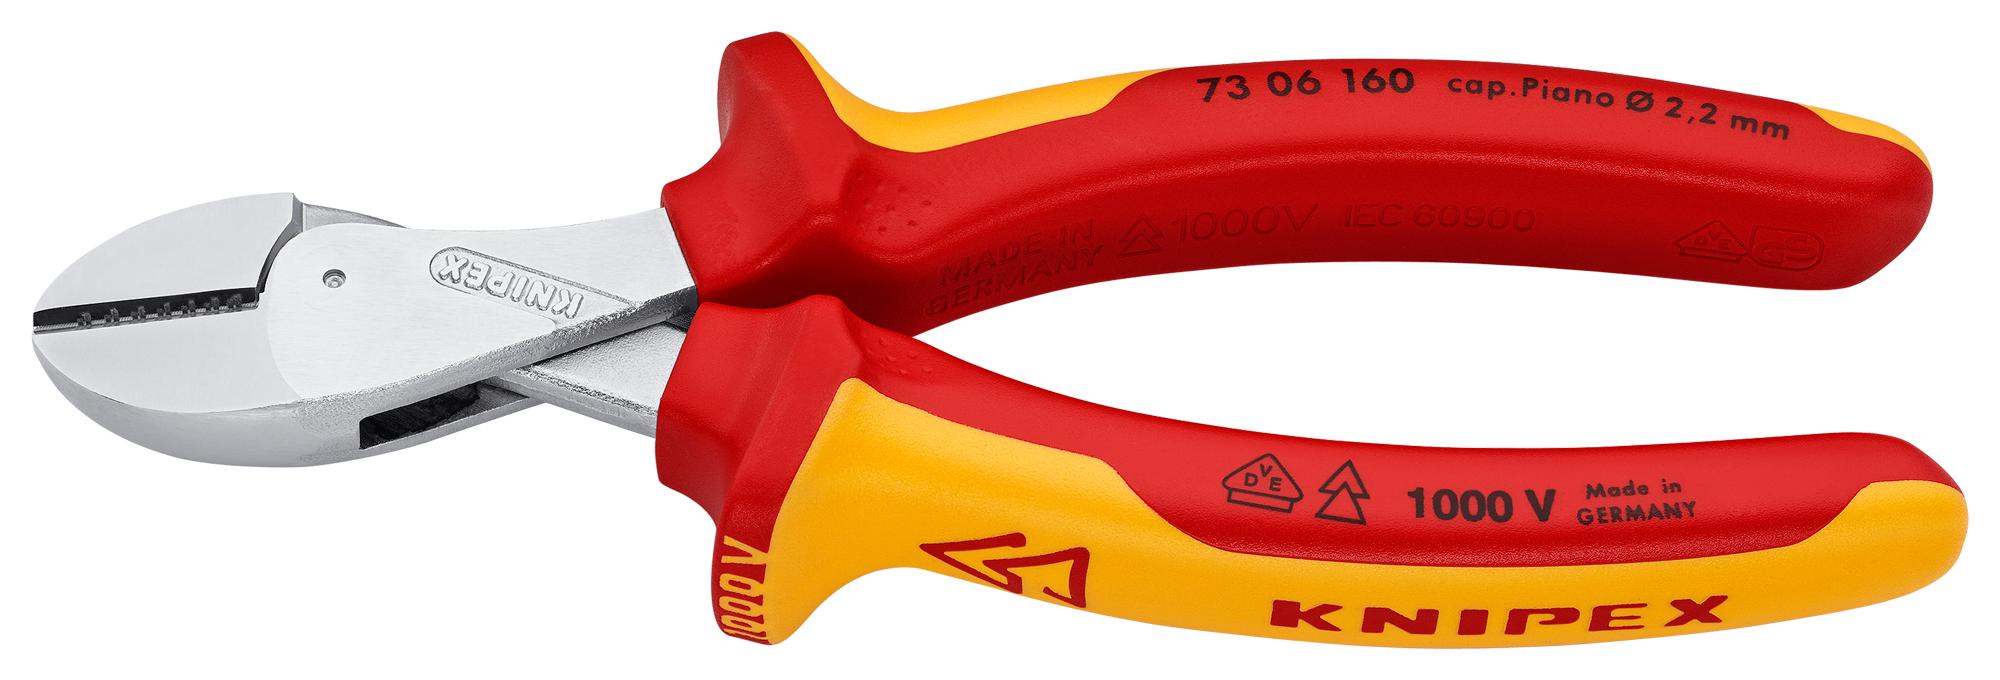 73 06 160 CUTTER, SIDE, COMPACT, X-CUT, VDE KNIPEX